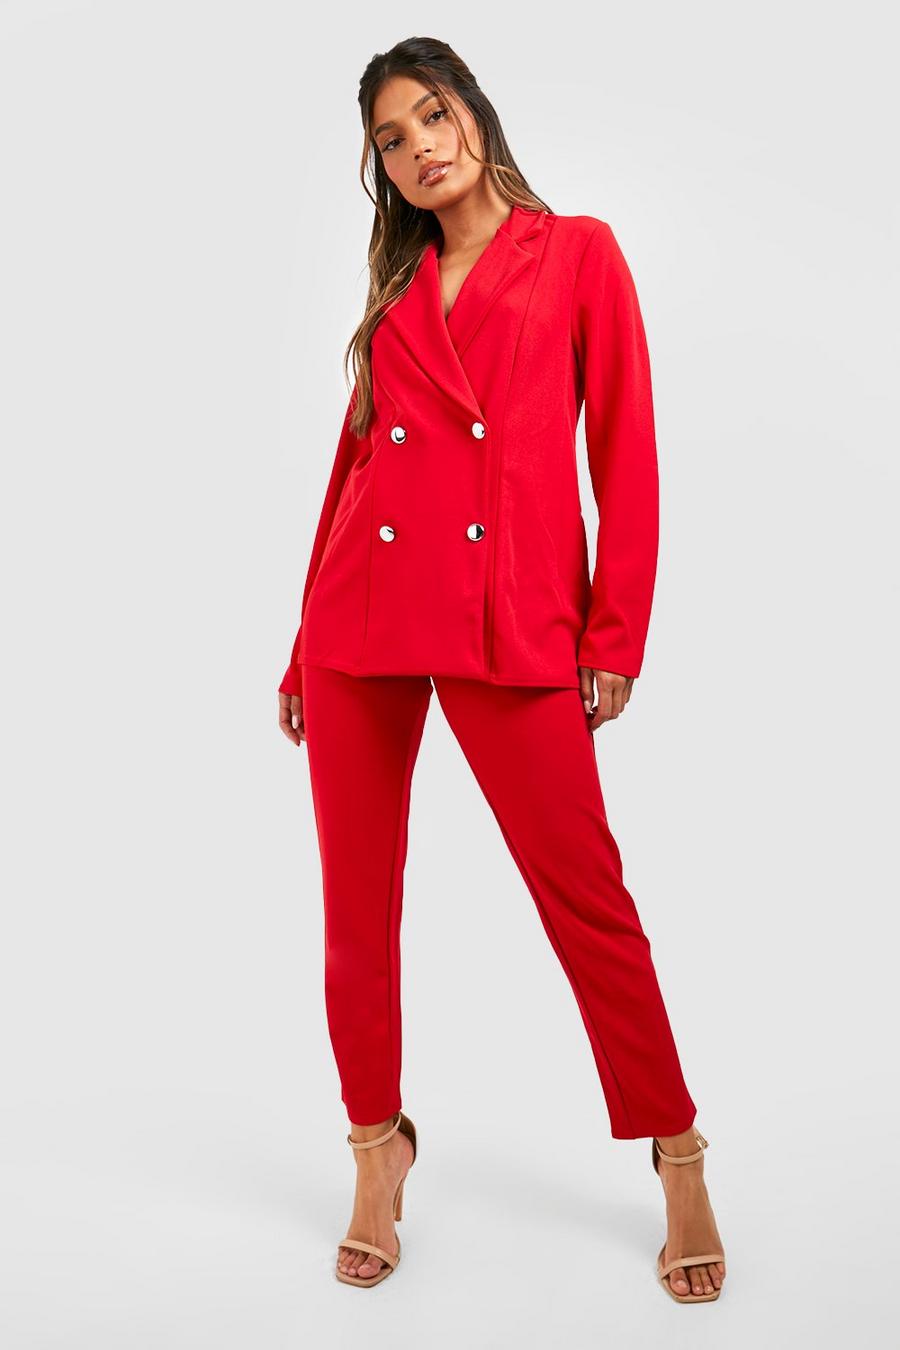 Women's Double Breasted Blazer And Trouser Suit Set | Boohoo UK